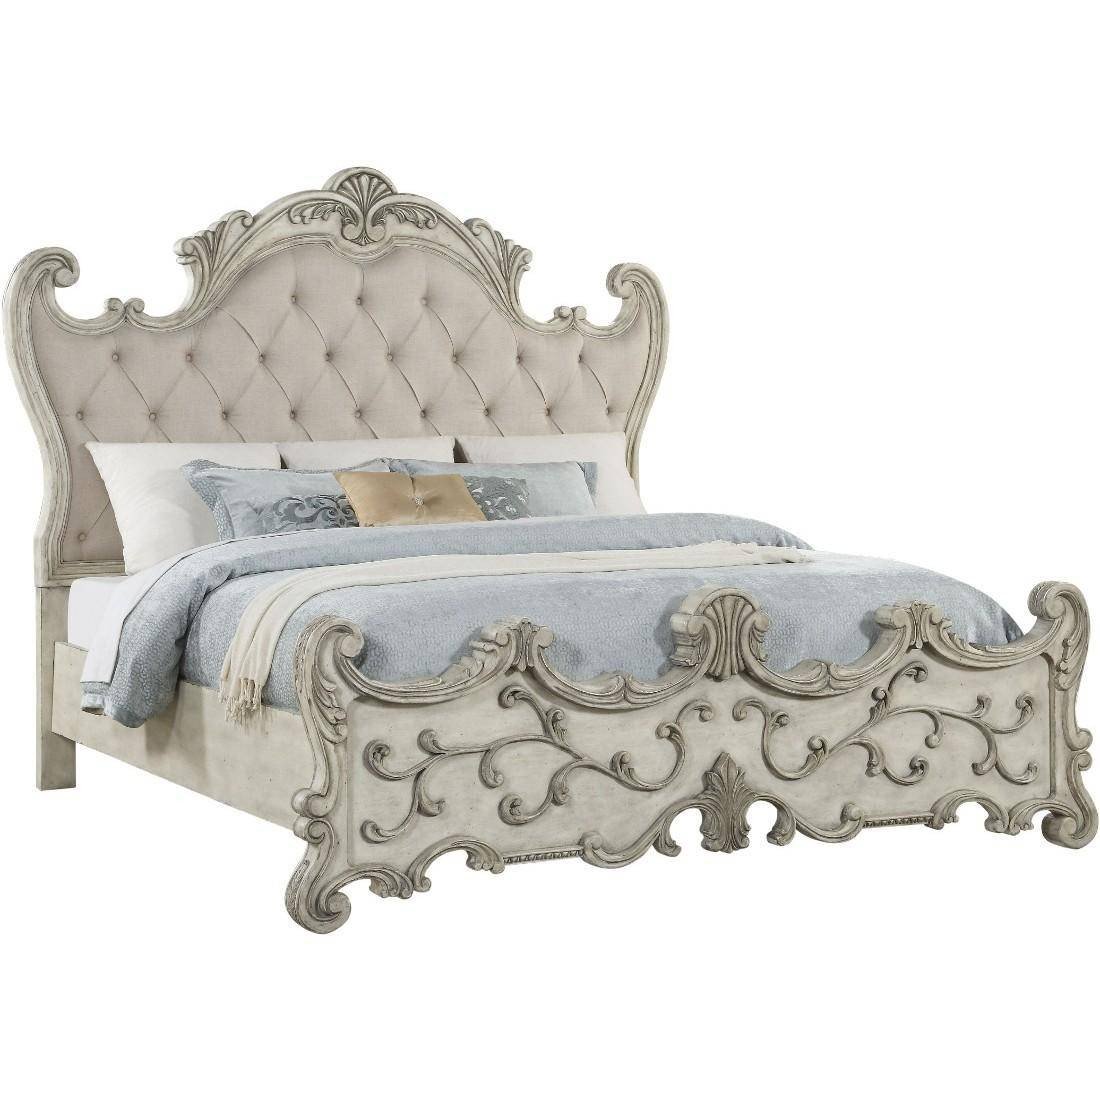 Acme Furniture Bedroom Set Awesome Luxury King Bedroom Set 5p W Chest Antique White Fabric